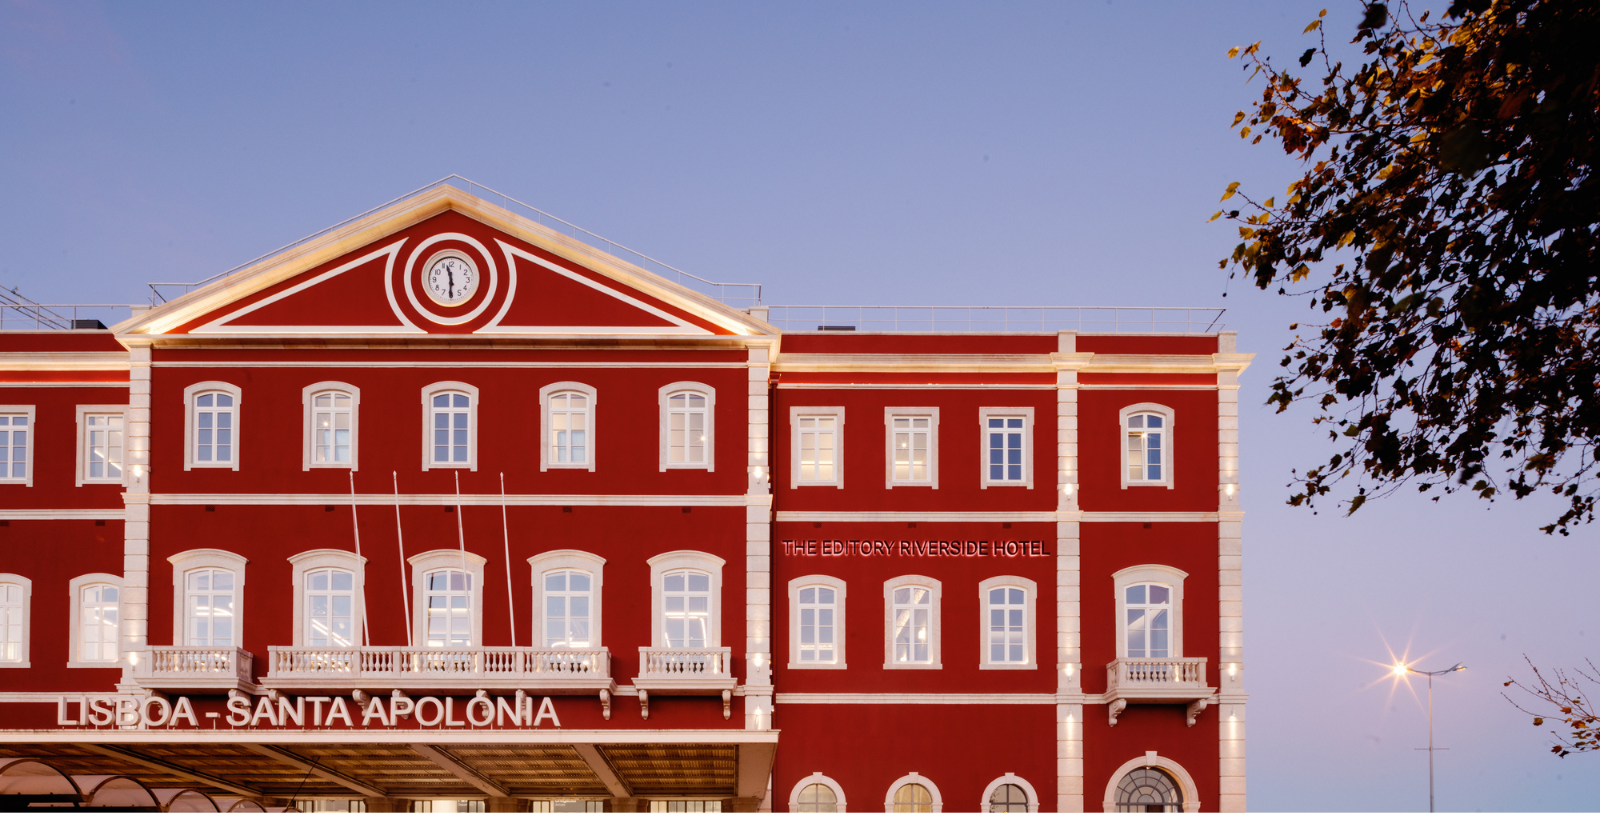 Discover the fascinating railway legacy of The Editory Riverside Hotel, which resides in Santa Apolónia Station, Lisbon’s original train station and the oldest railway terminal in Portugal.